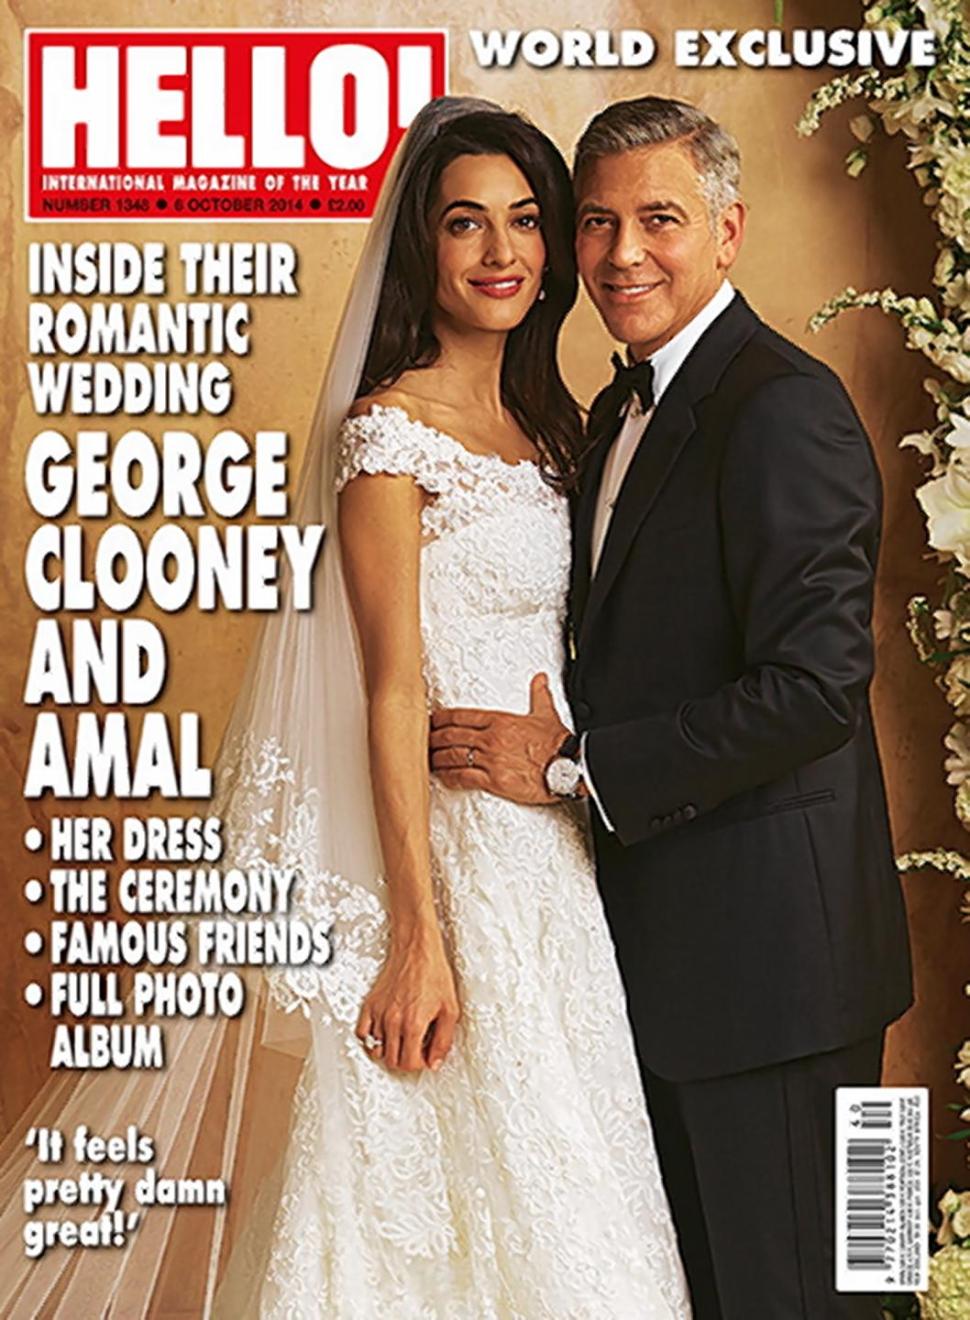 Hello! has the story covered with George Clooney and Amal Alamuddin up front.